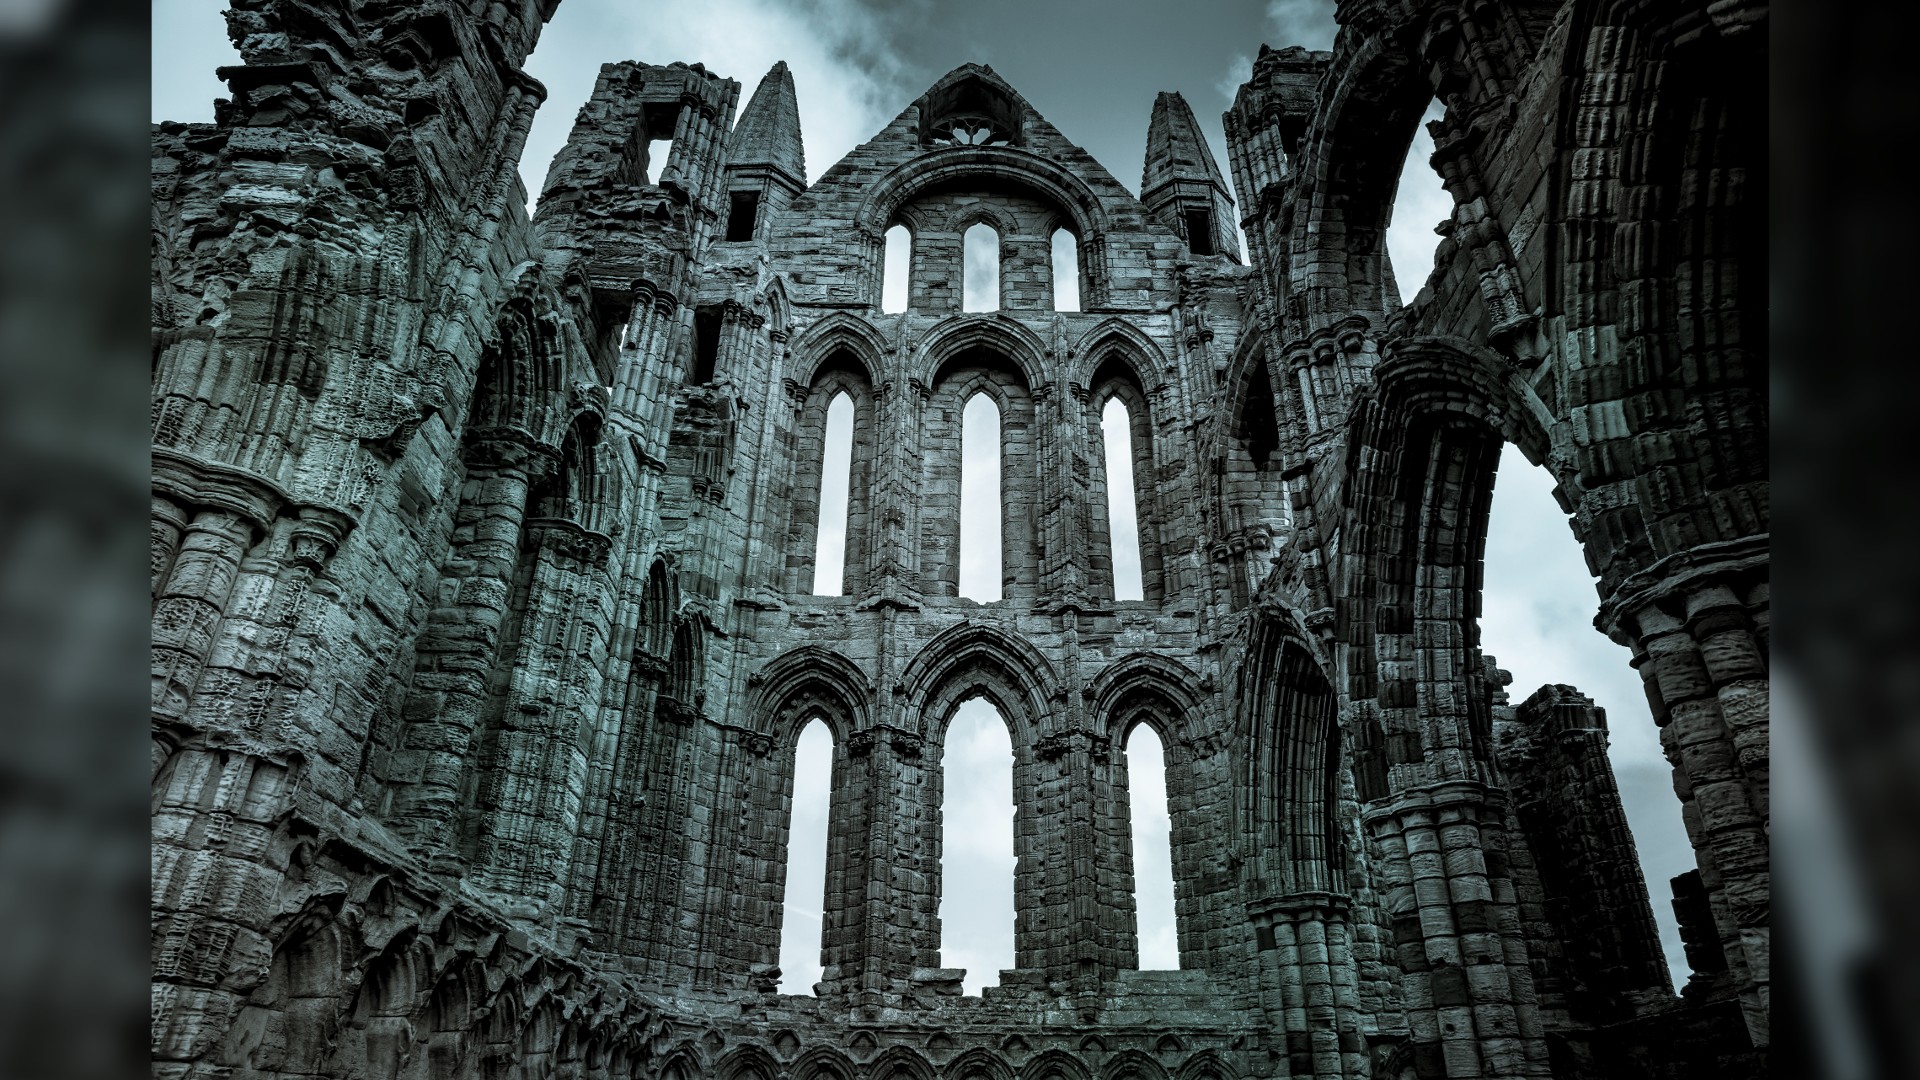 The dramatic ruins of the 7th century Whitby Abbey on the coast of North Yorkshire, England. The imposing building is made out of gray stone bricks, with numerous archways. We are facing a 3 by 3 layout of tall, thin window arches that get shorter as it goes up.